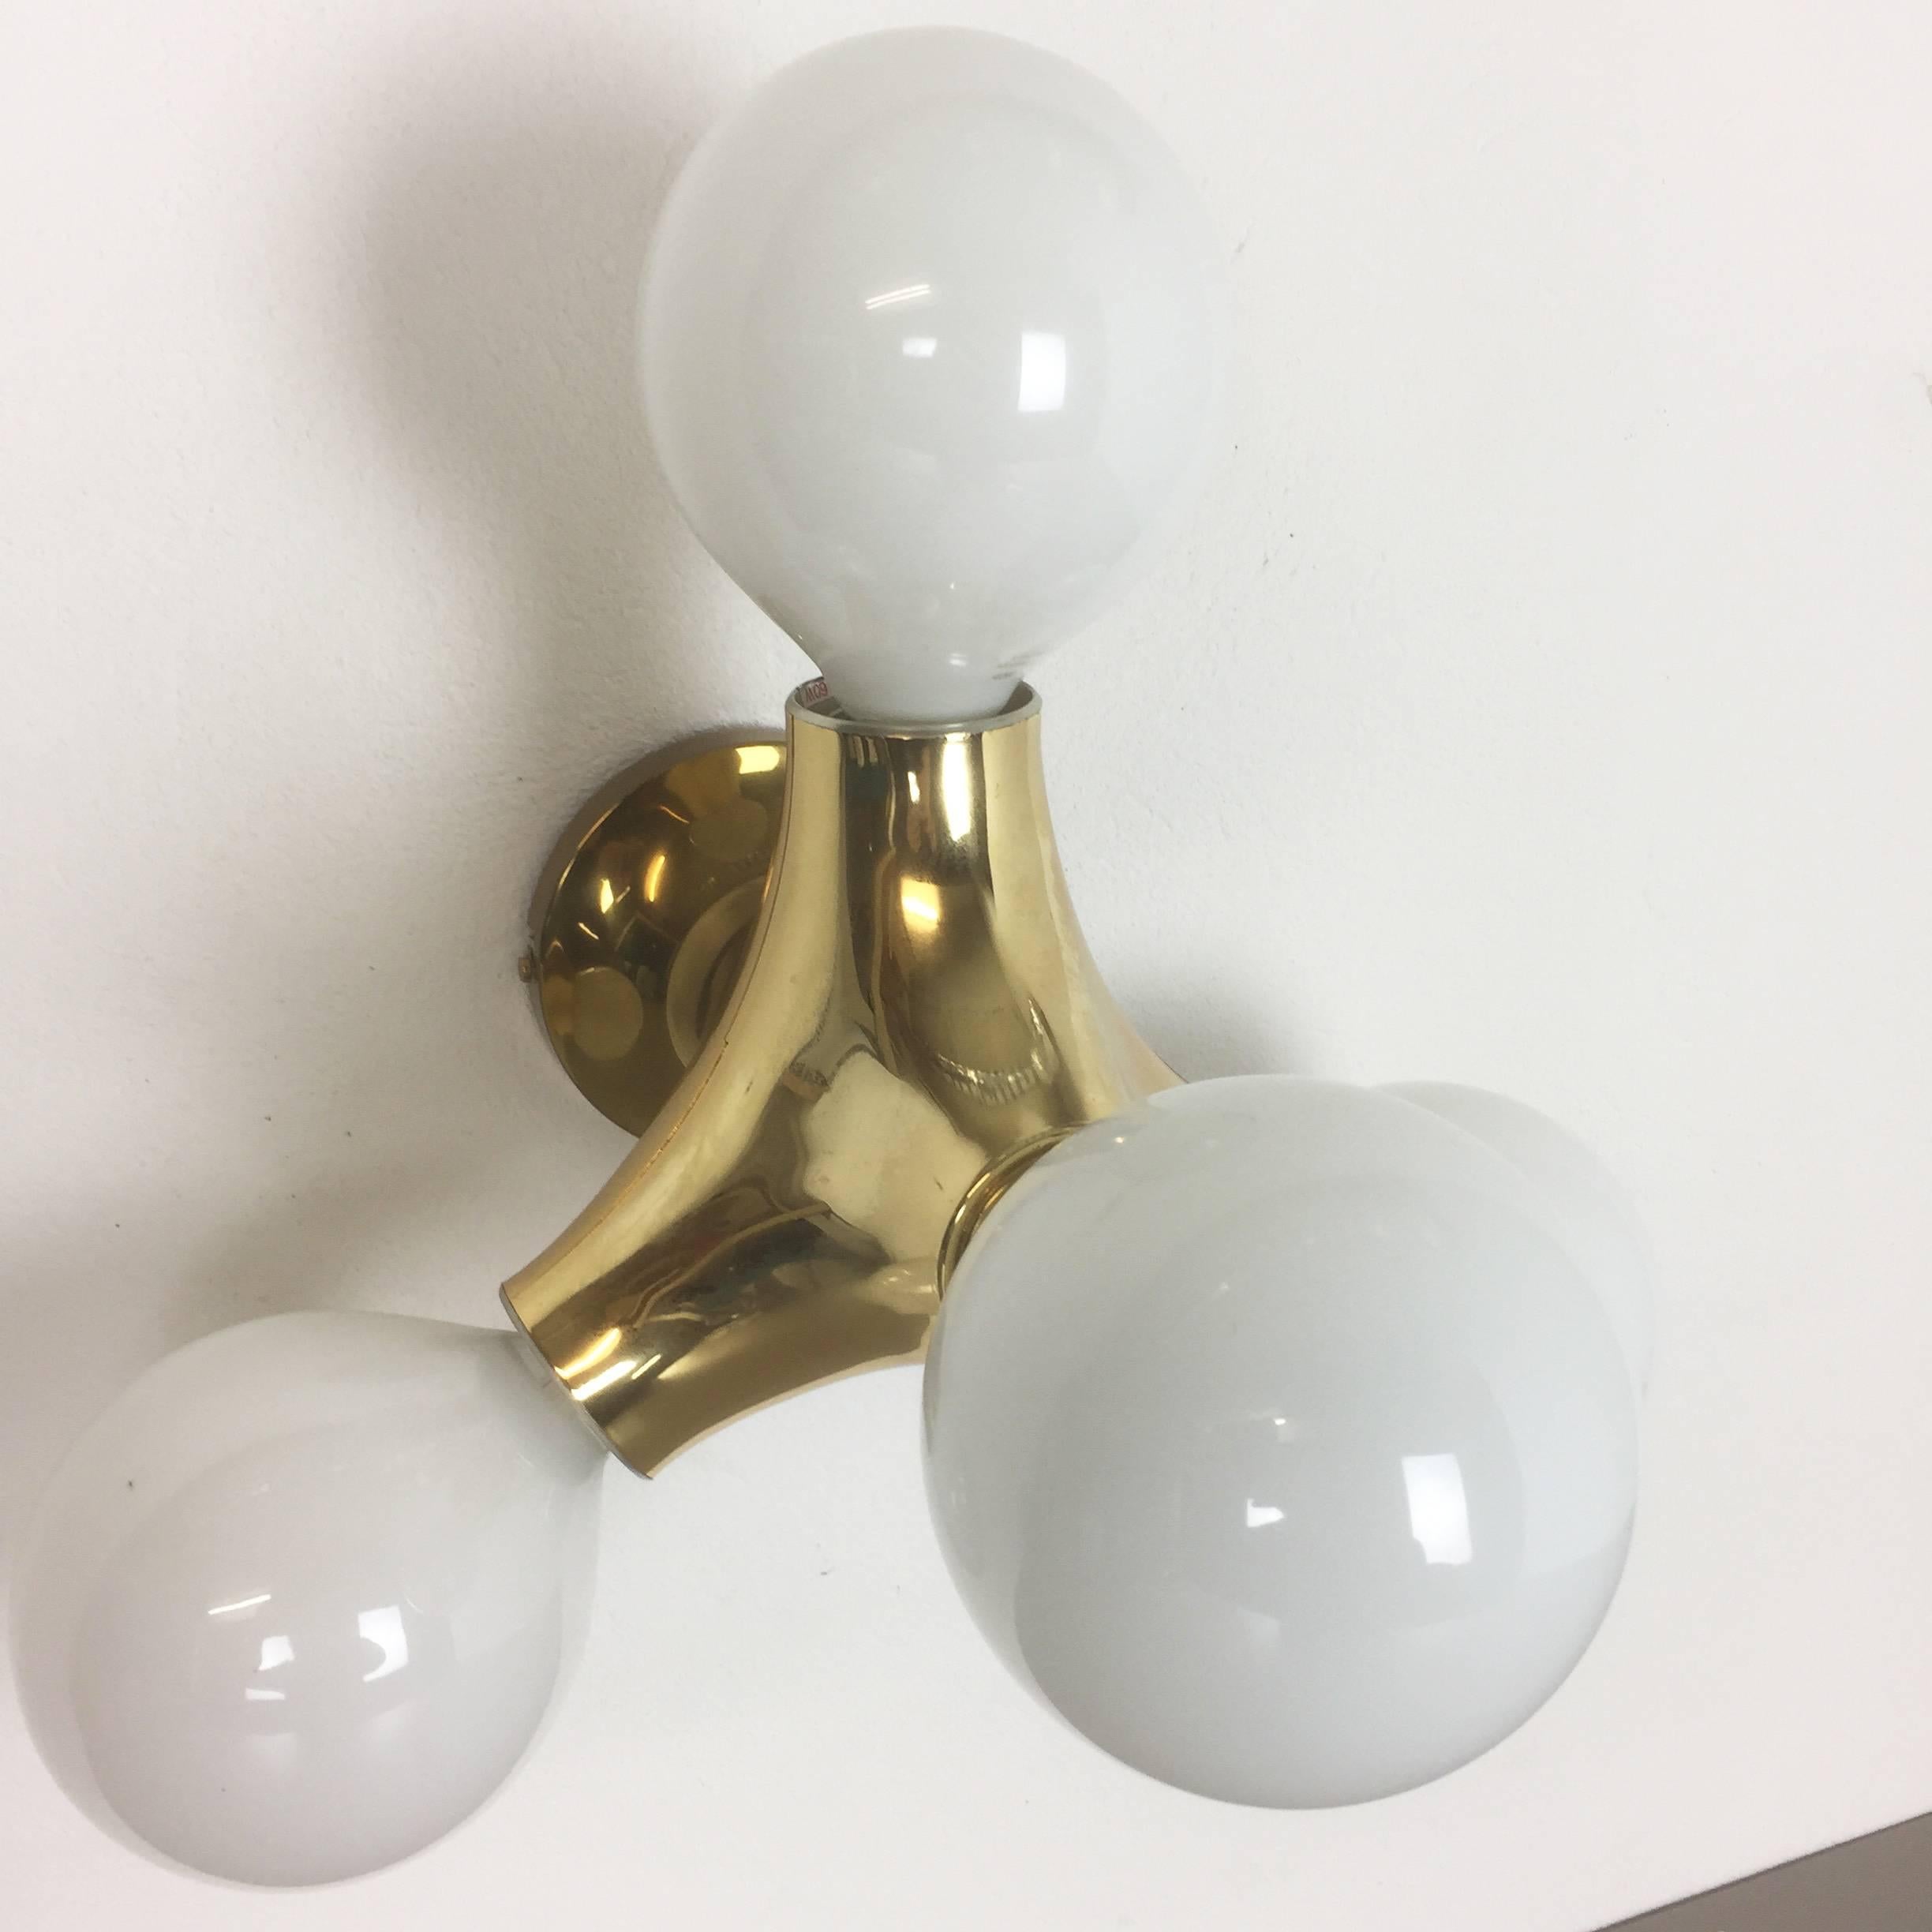 20th Century Original Modernist 1960s Atomic Wall and Ceiling Light by Cosack Lights, Germany